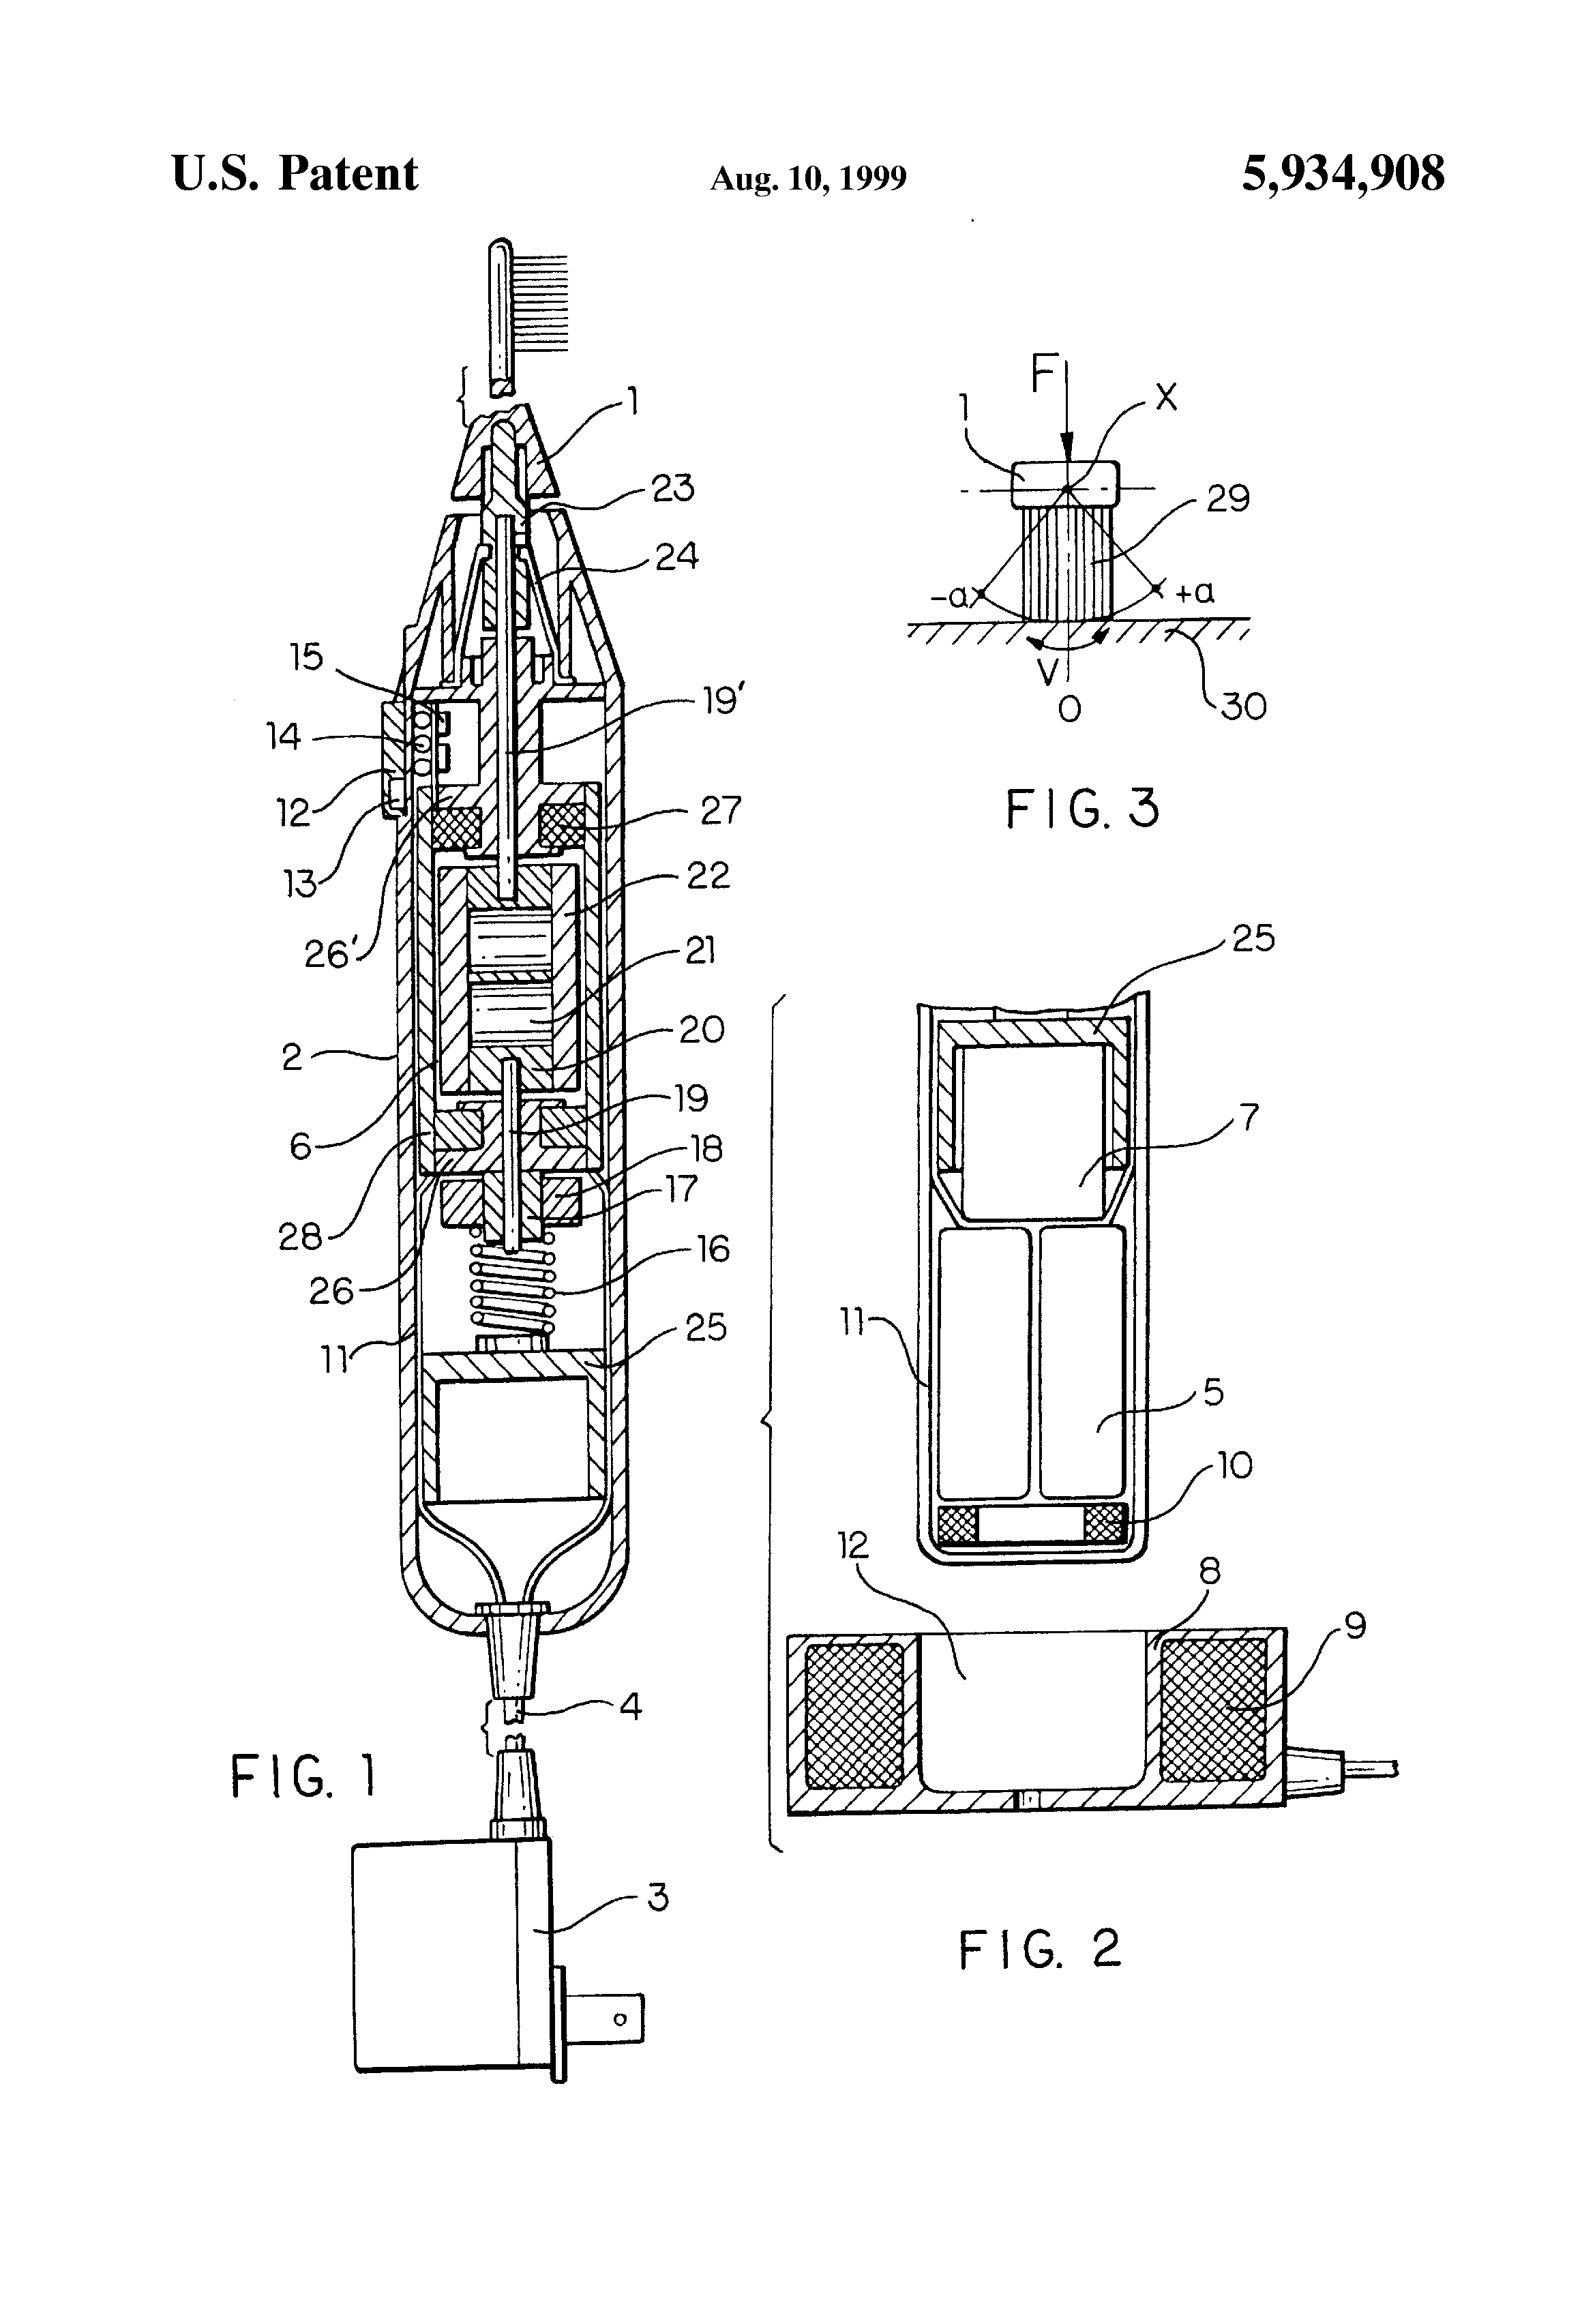 An image of the patent for Philippe-Guy Woog's High Powered Automatic Electromechanical Toothbrush.